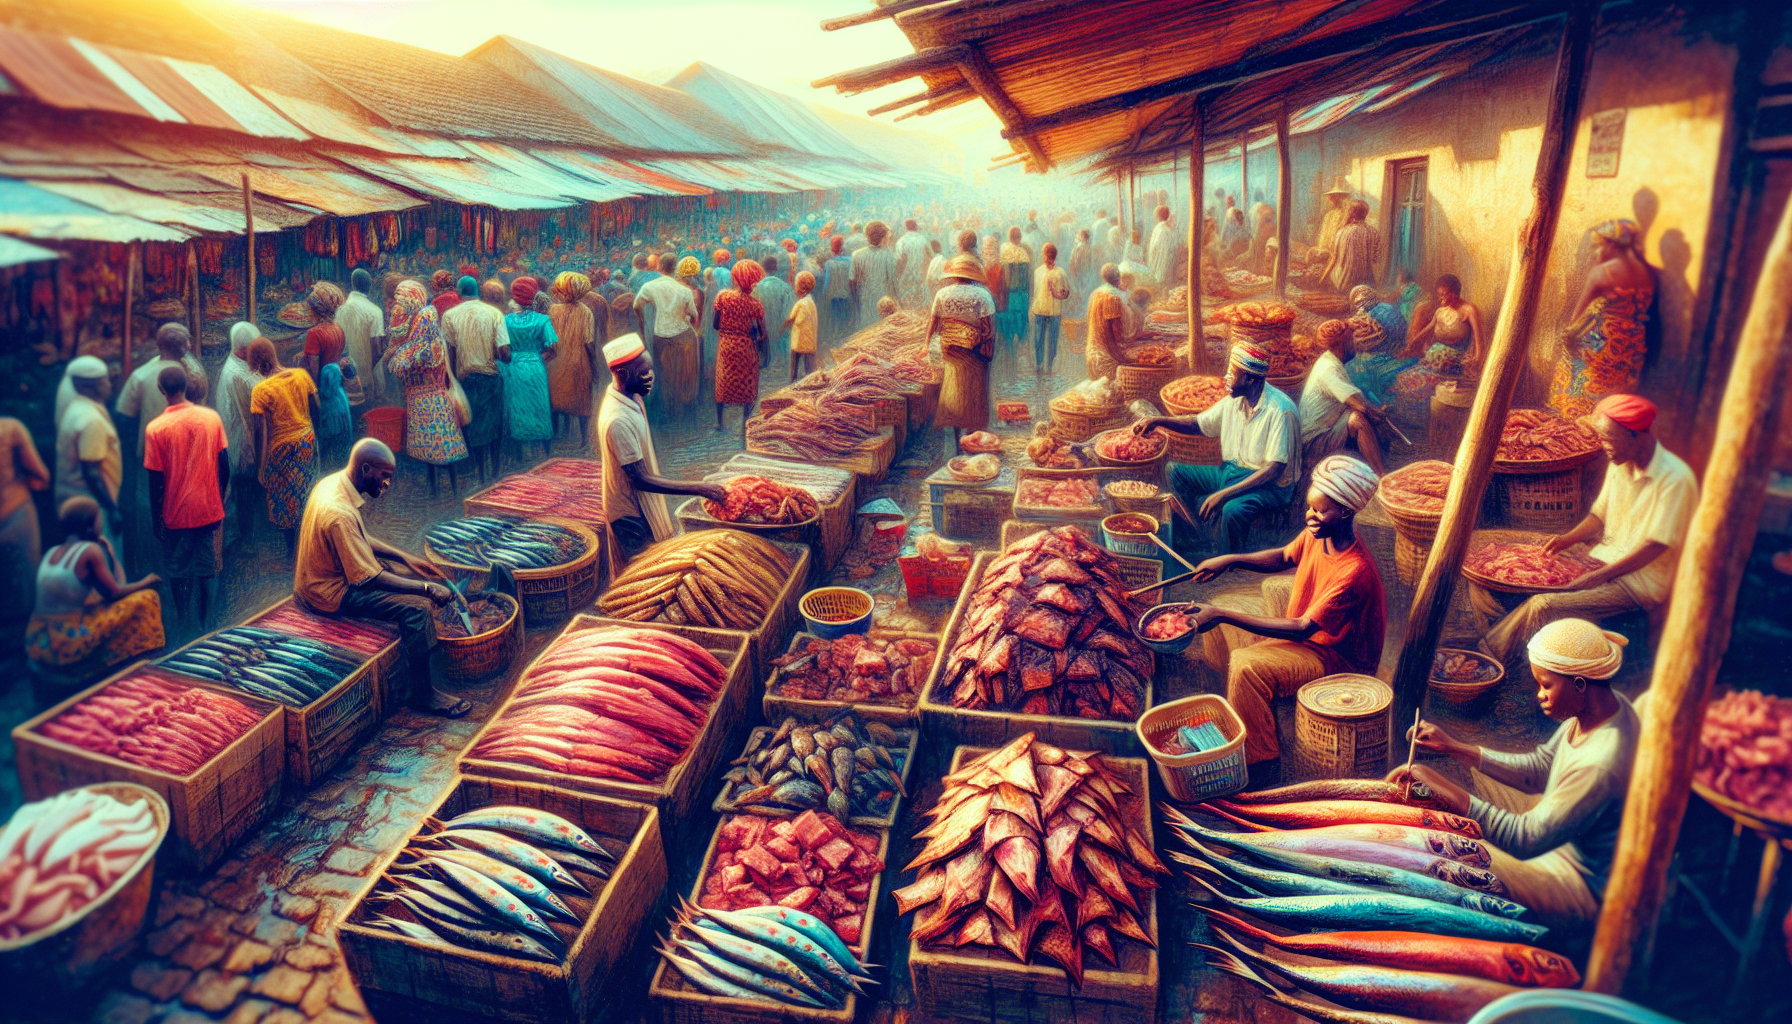 An artistic illustration of a vibrant outdoor Congolese market with a diverse selection of meats, including goat, chicken, and smoked fish